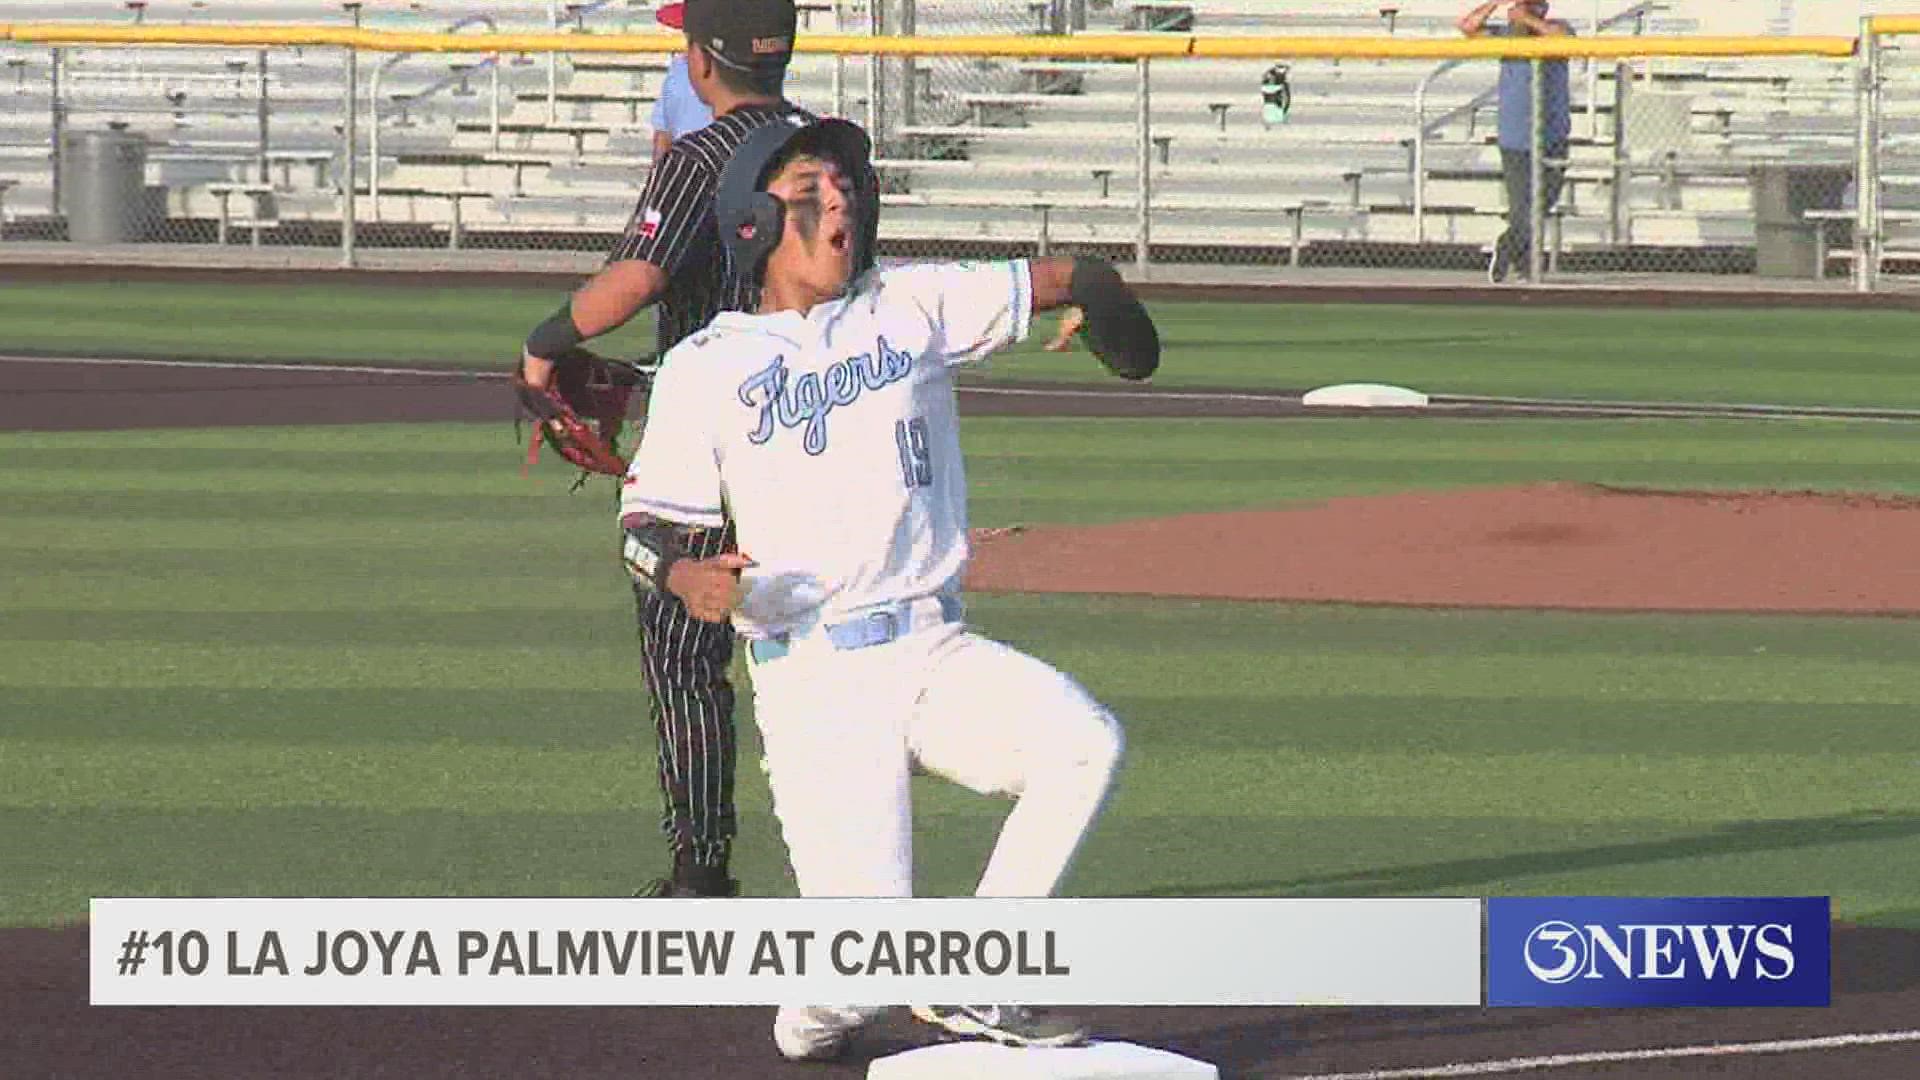 Carroll rallies to win Game 1 by a final of 5-4 while Ray blanked Laredo Martin 6-0 in Game 1 (highlights courtesy KGNS-TV).